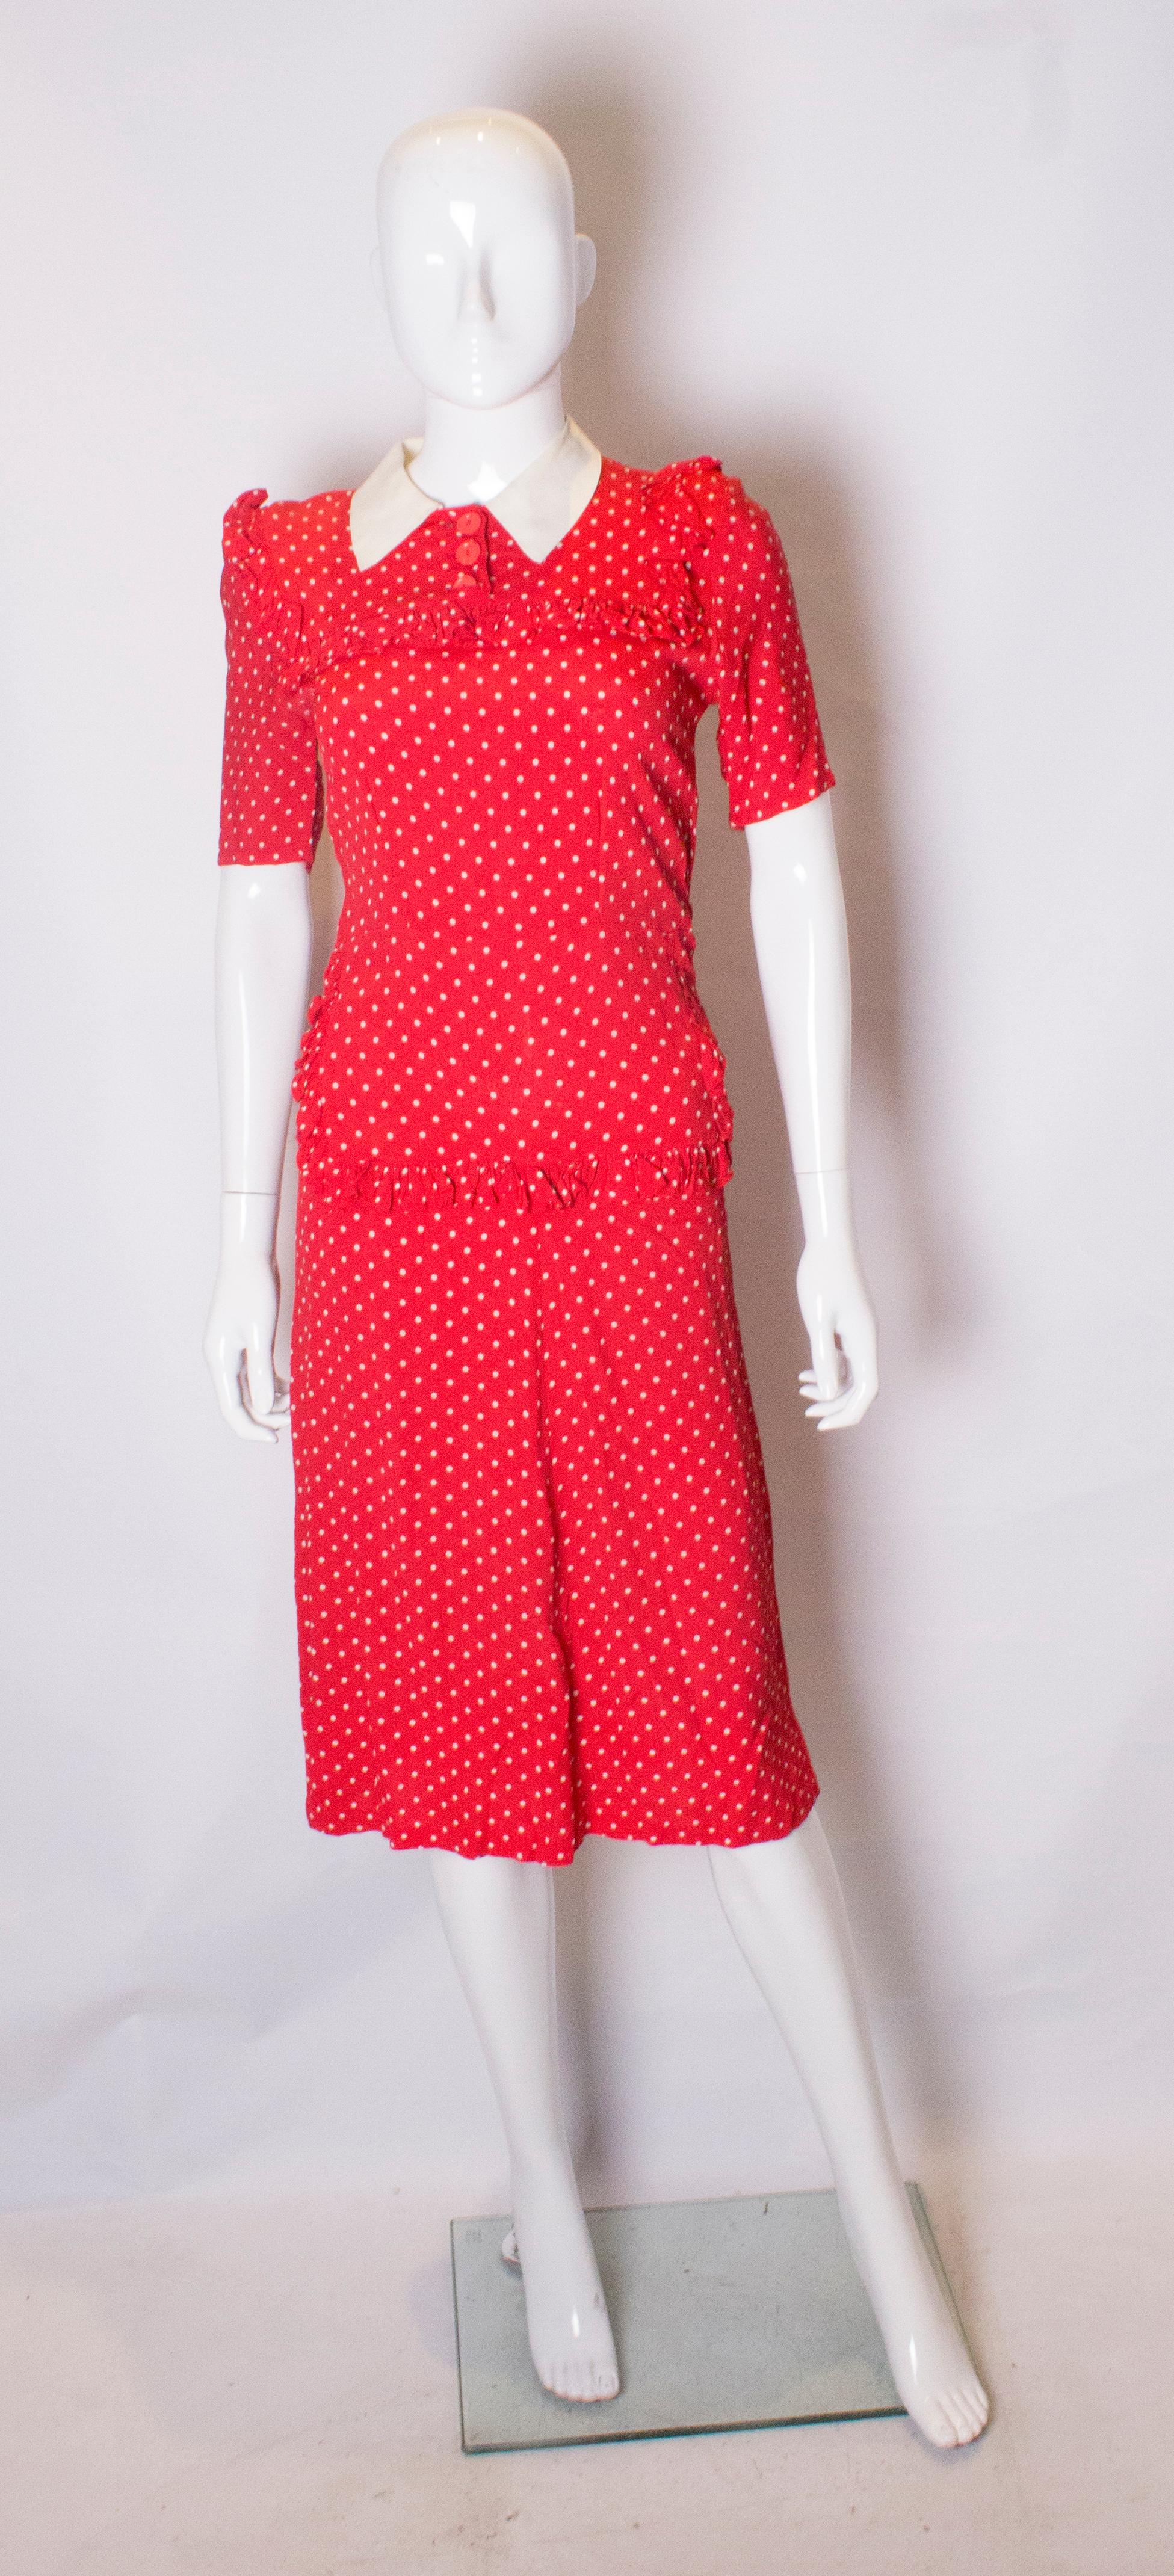 A pretty polka dot dress from the 1940s. 
The dress has a white collar, short sleeves , threee buttons on the front,  and a side popper opening.It has a frill trim around the bodice and the front , and small shoulder pads. 